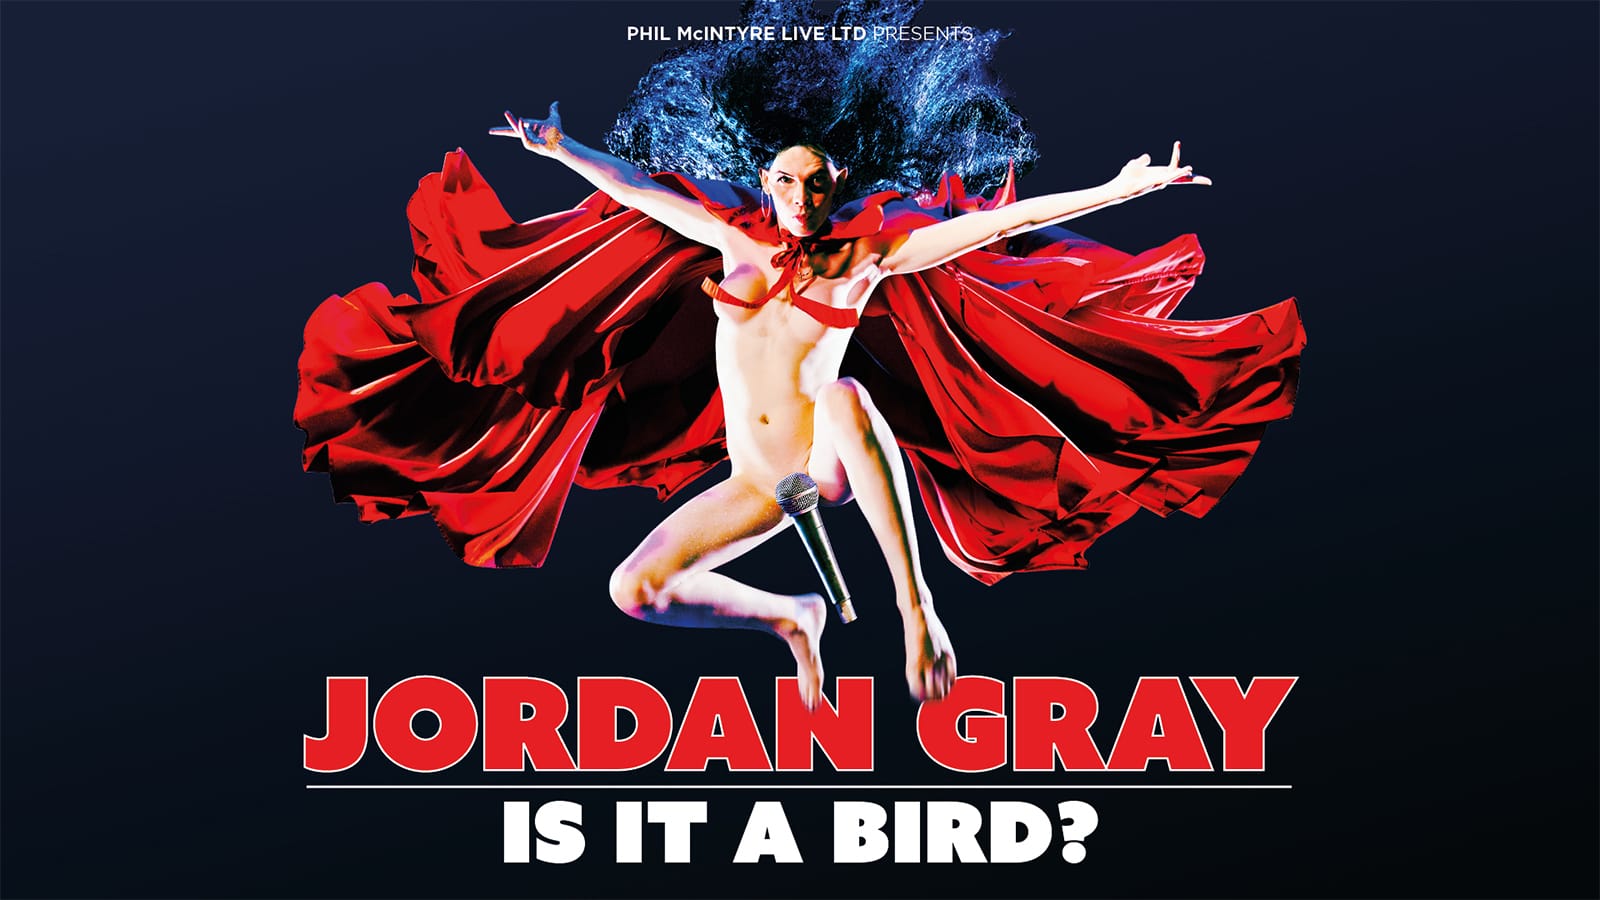 Jordan Gray is it a bird? with a woman jumping up naked wearing a cape